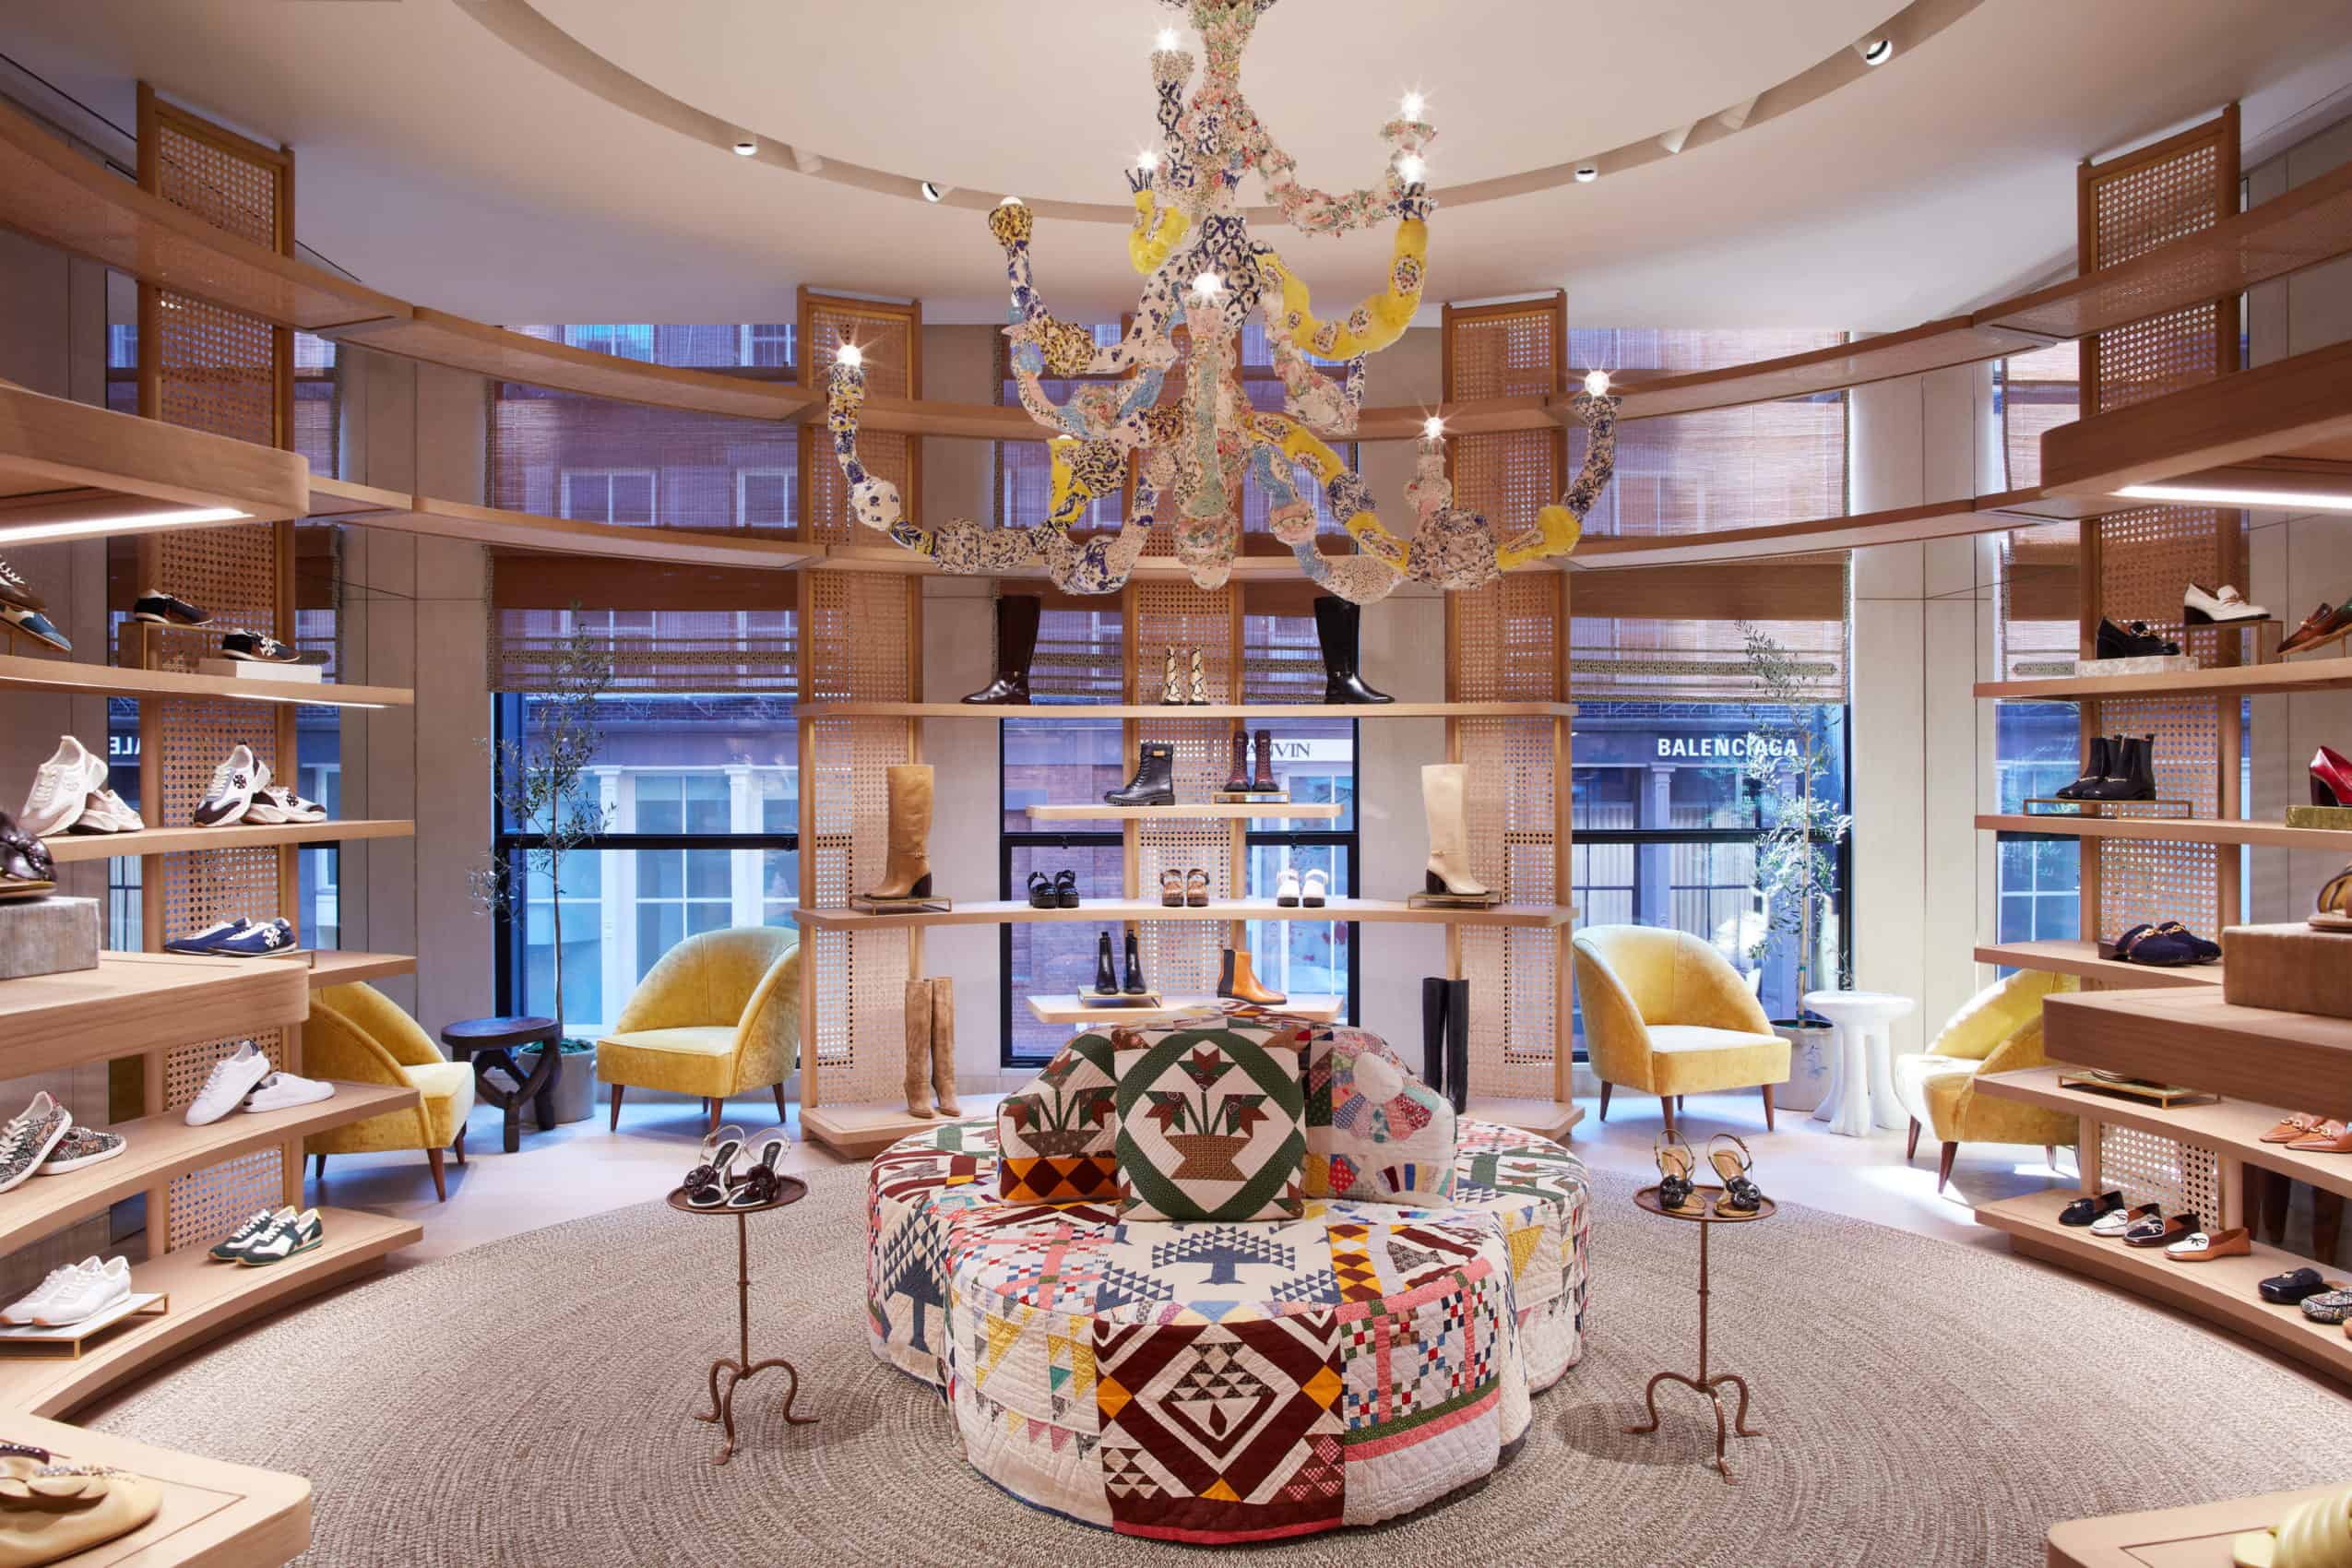 A Peek Inside Tory Burch's “Most Personal” Store Yet - Daily Front Row